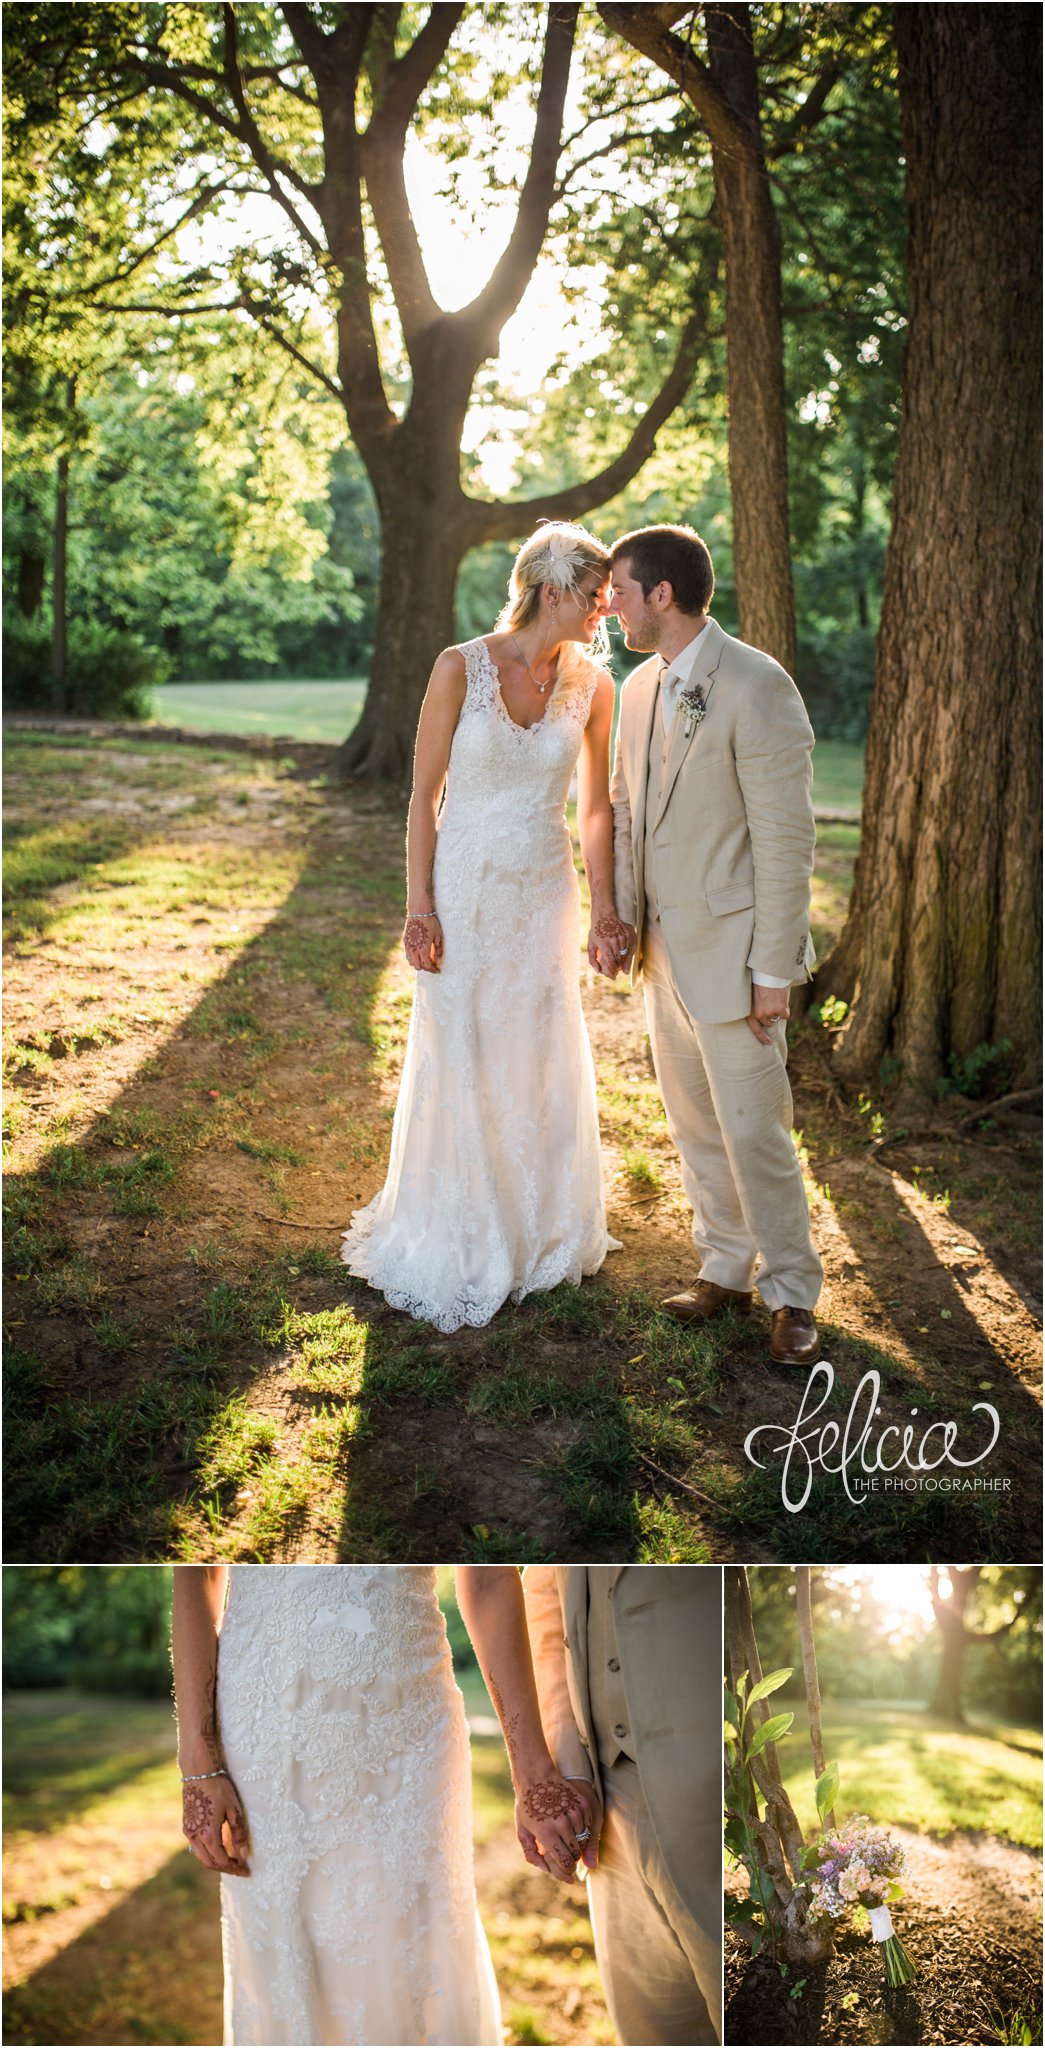 The Hawthorne House | Glowing Pictures | Bride and Groom Pose | Kansas City Wedding | Felicia The Photographer